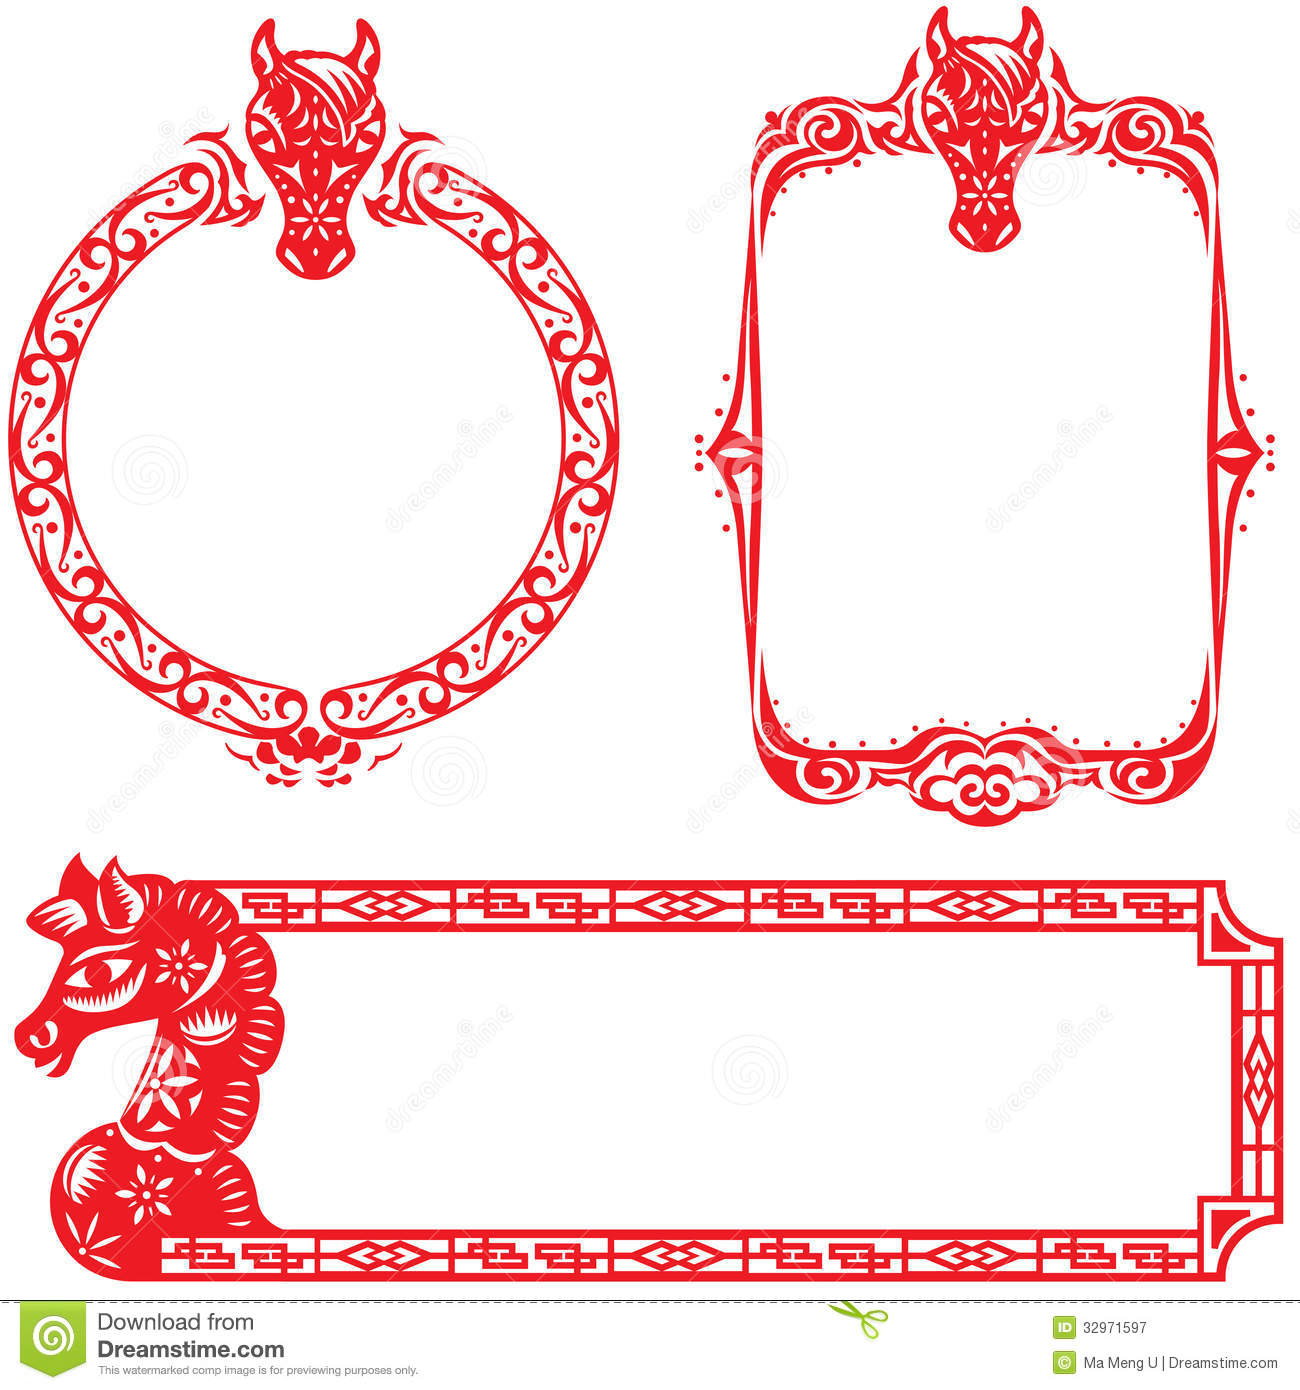 Year Of Horse Border Design Elements Royalty Free Stock Photography